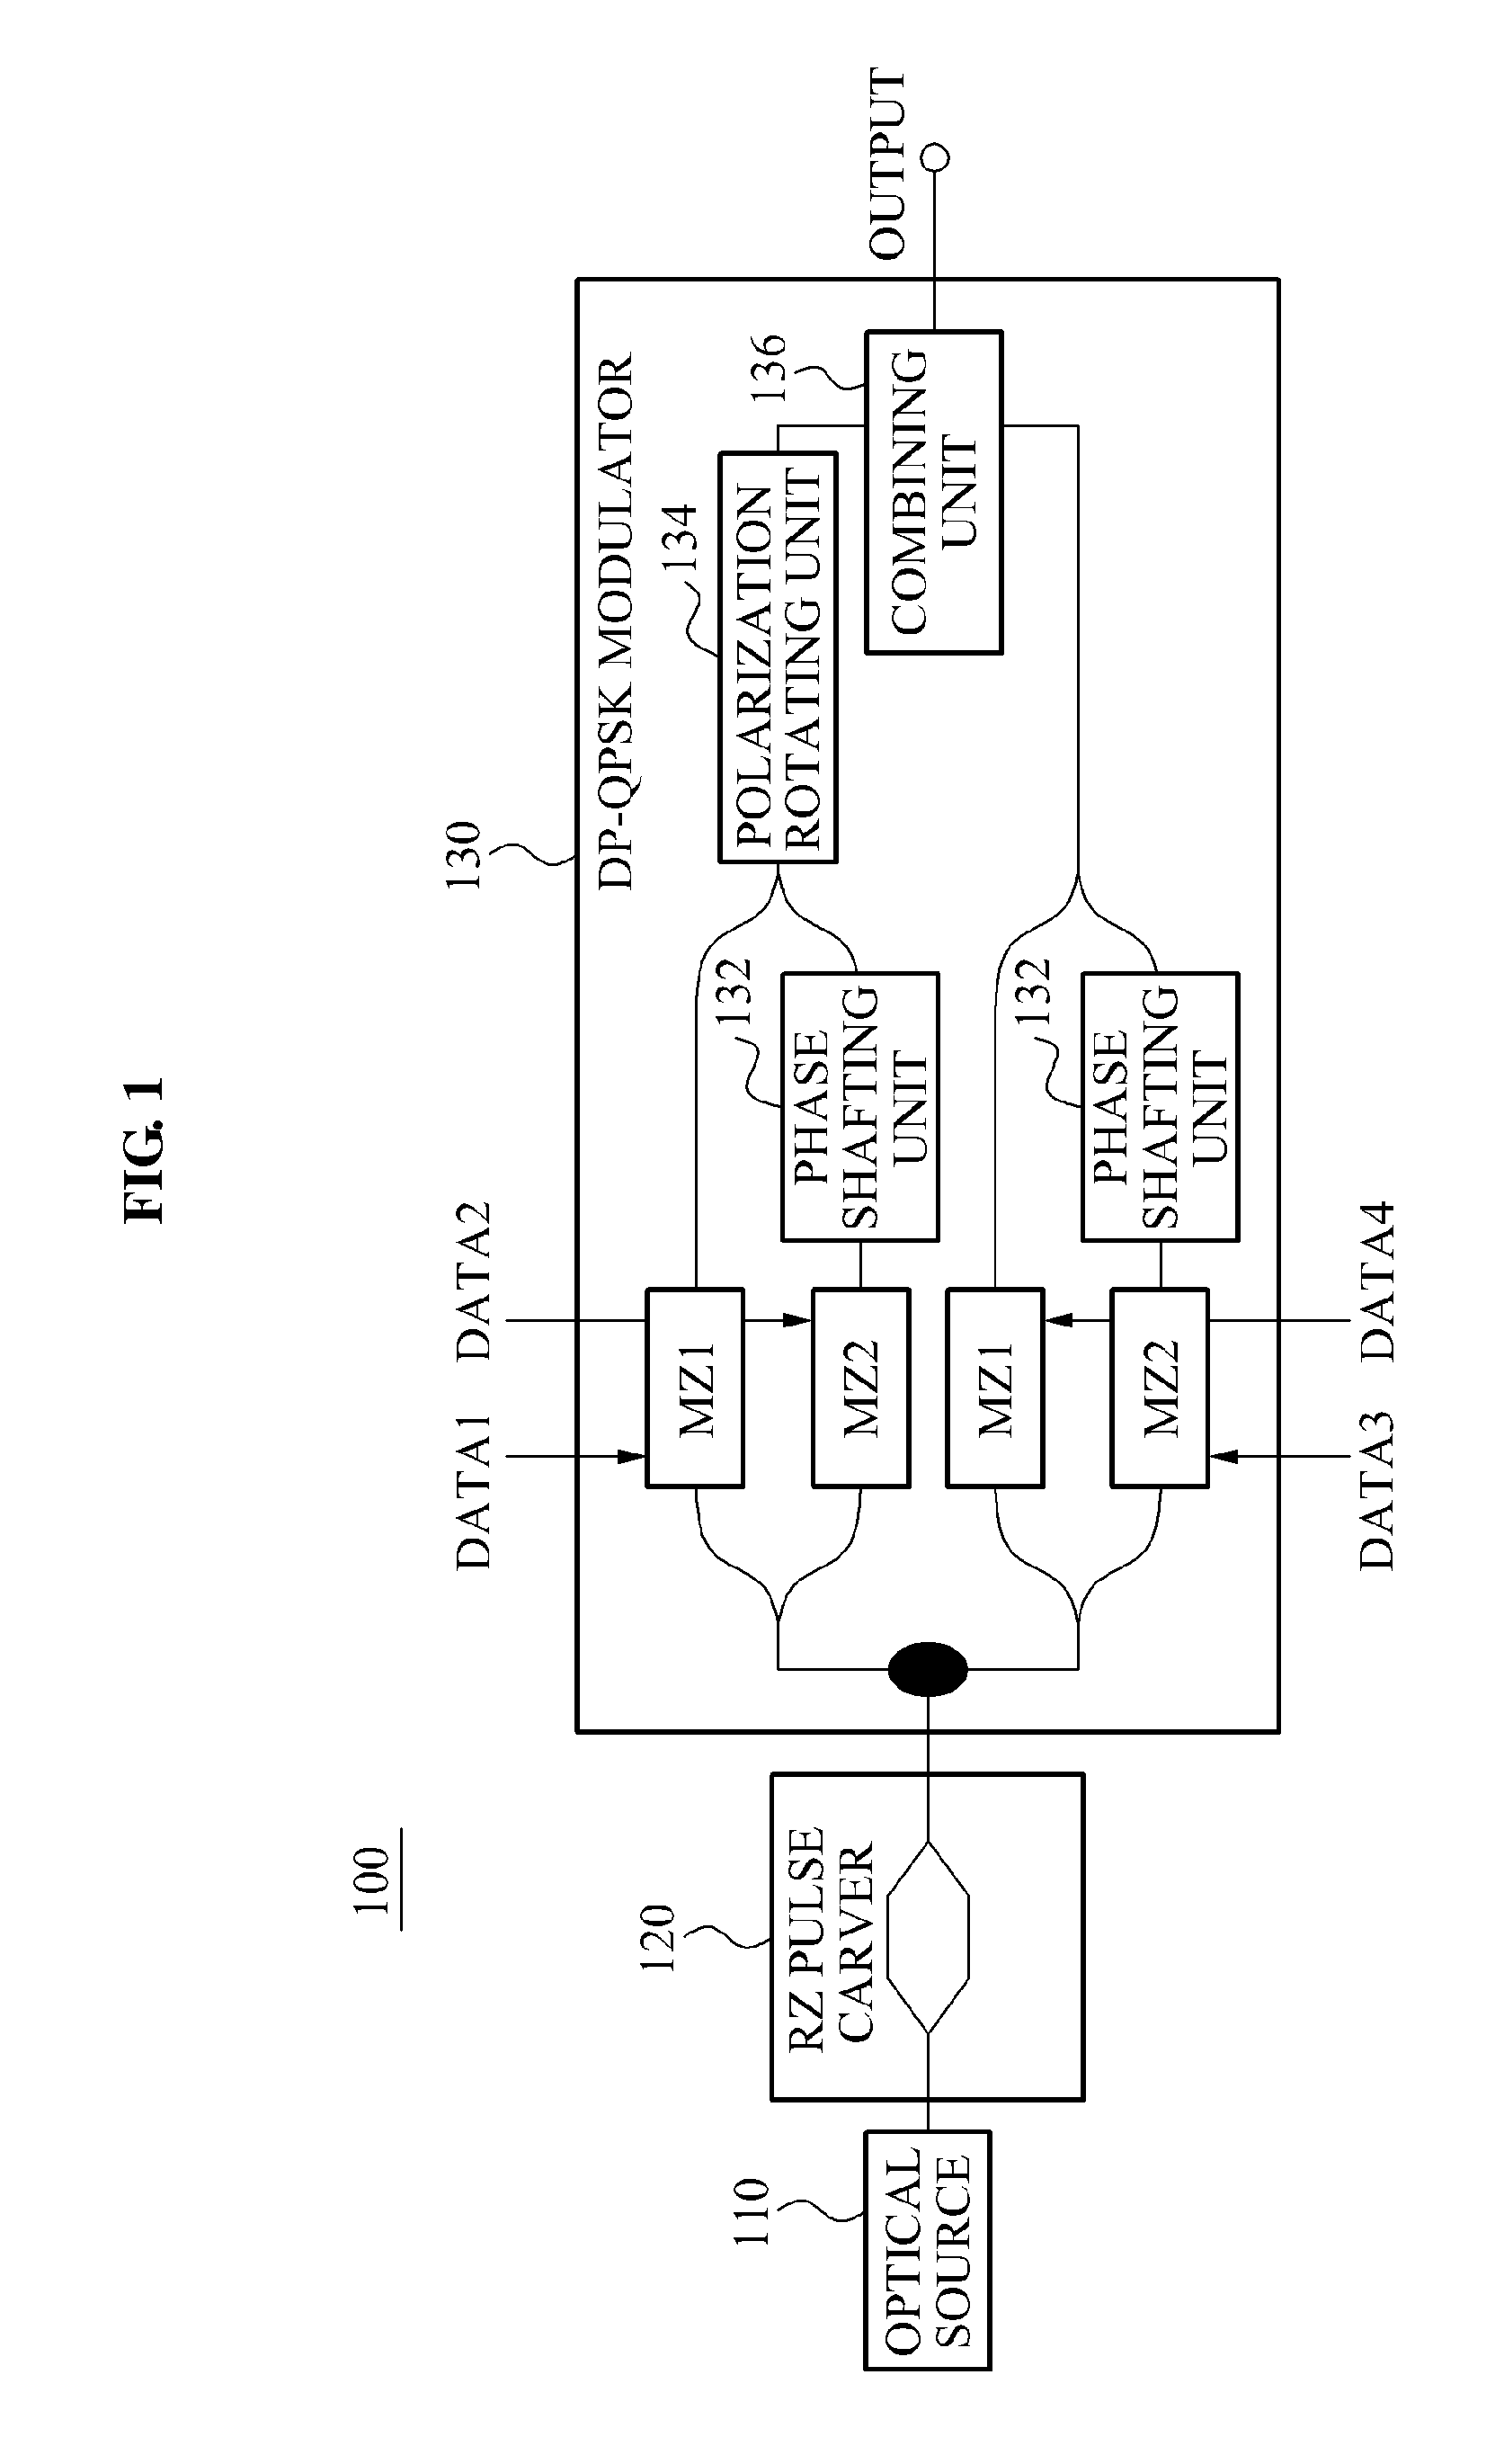 Coherent optical receiving apparatus and optical signal processing method